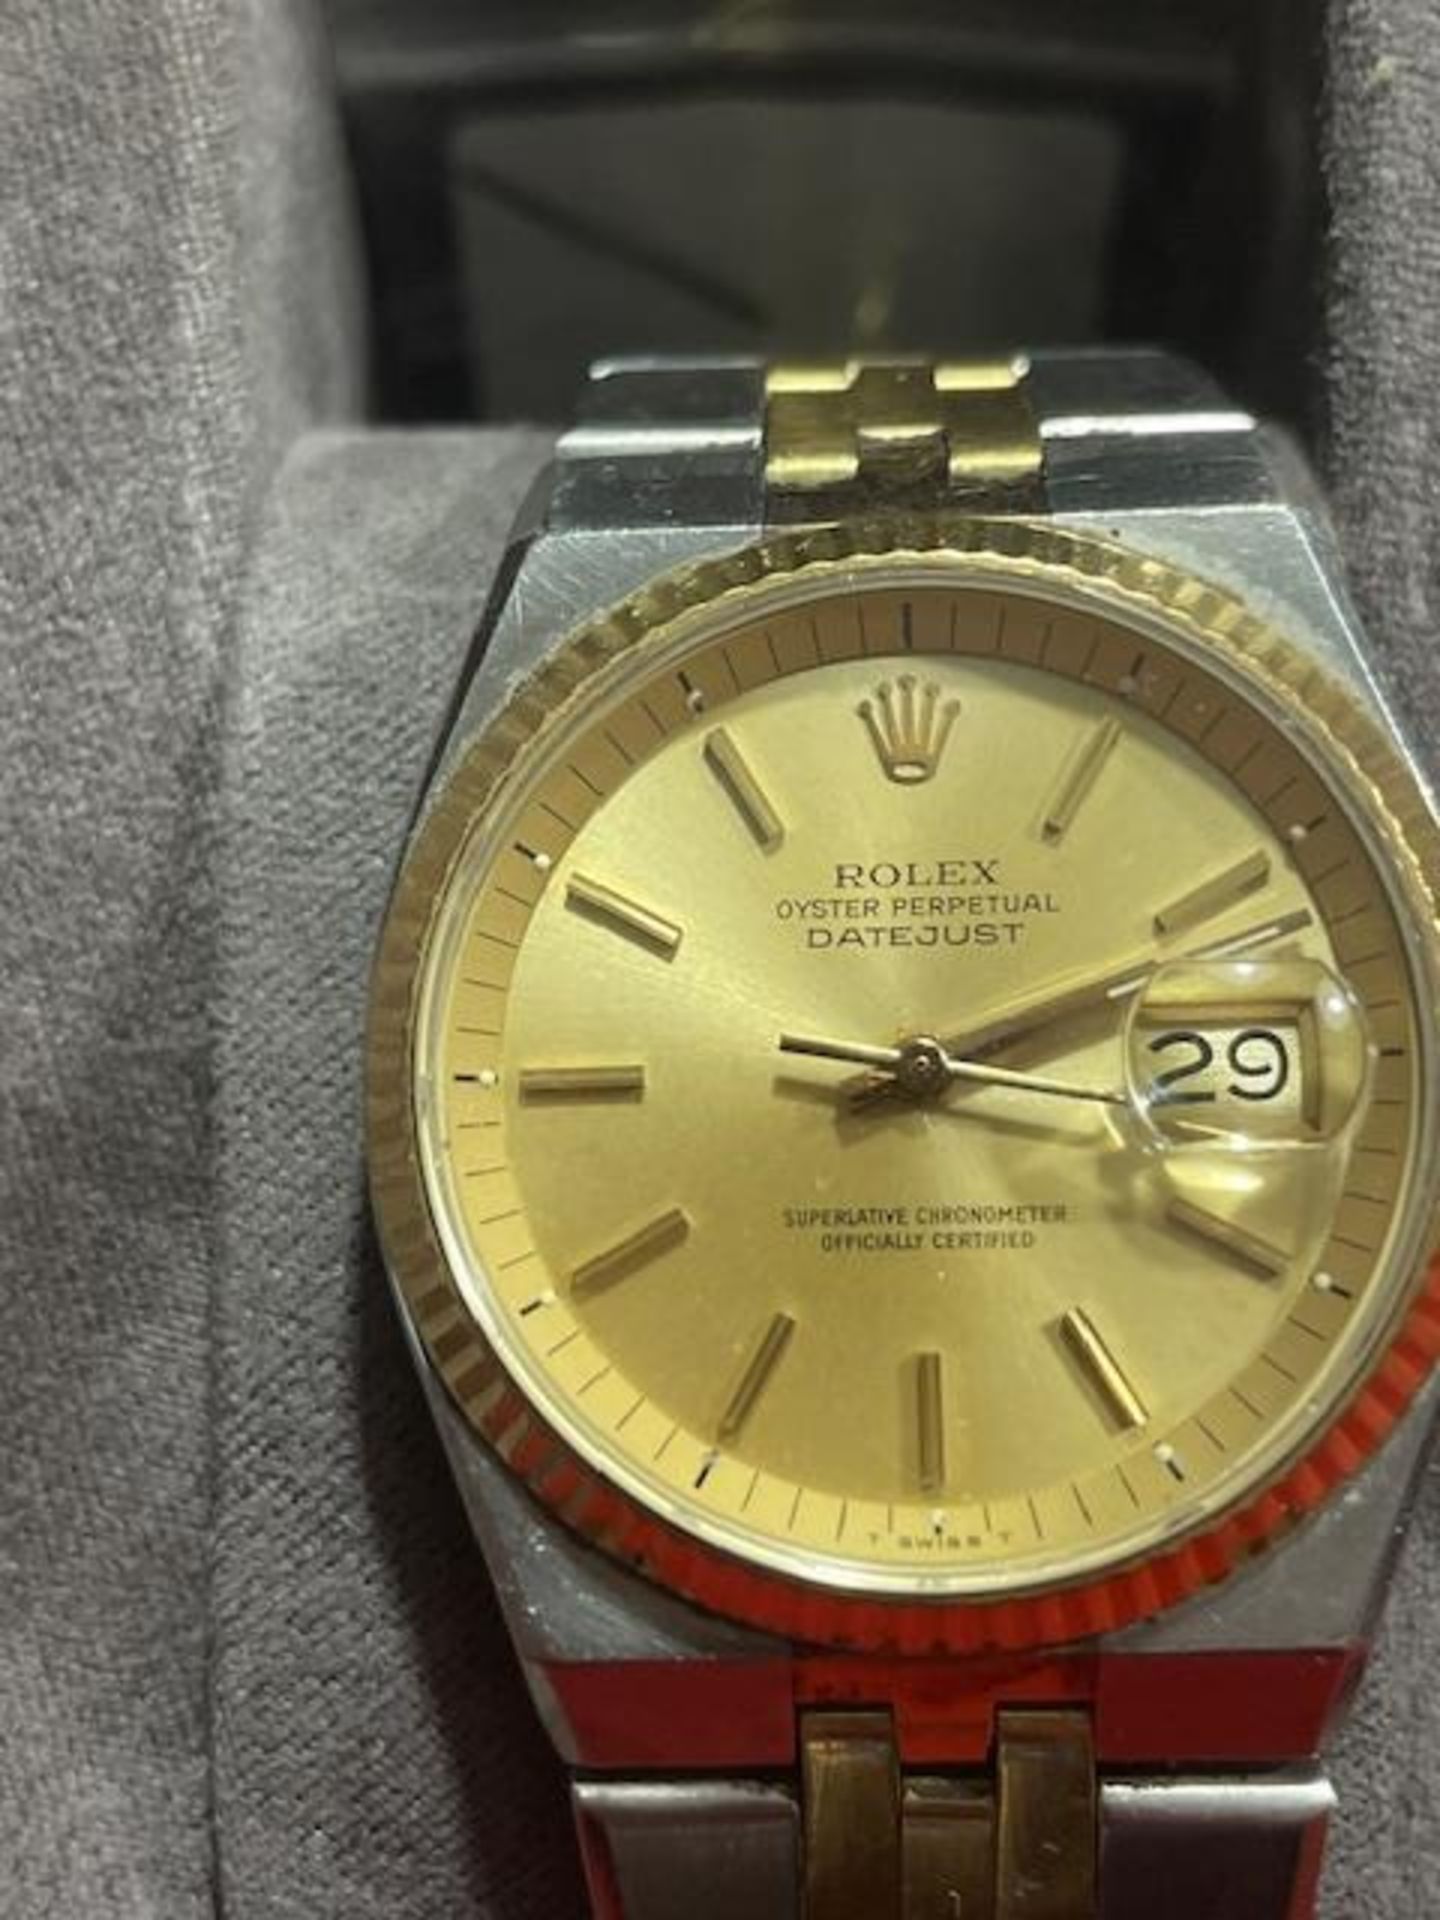 Rolex Oyster Purpetual DATEJUST Mens Watch - Image 9 of 15